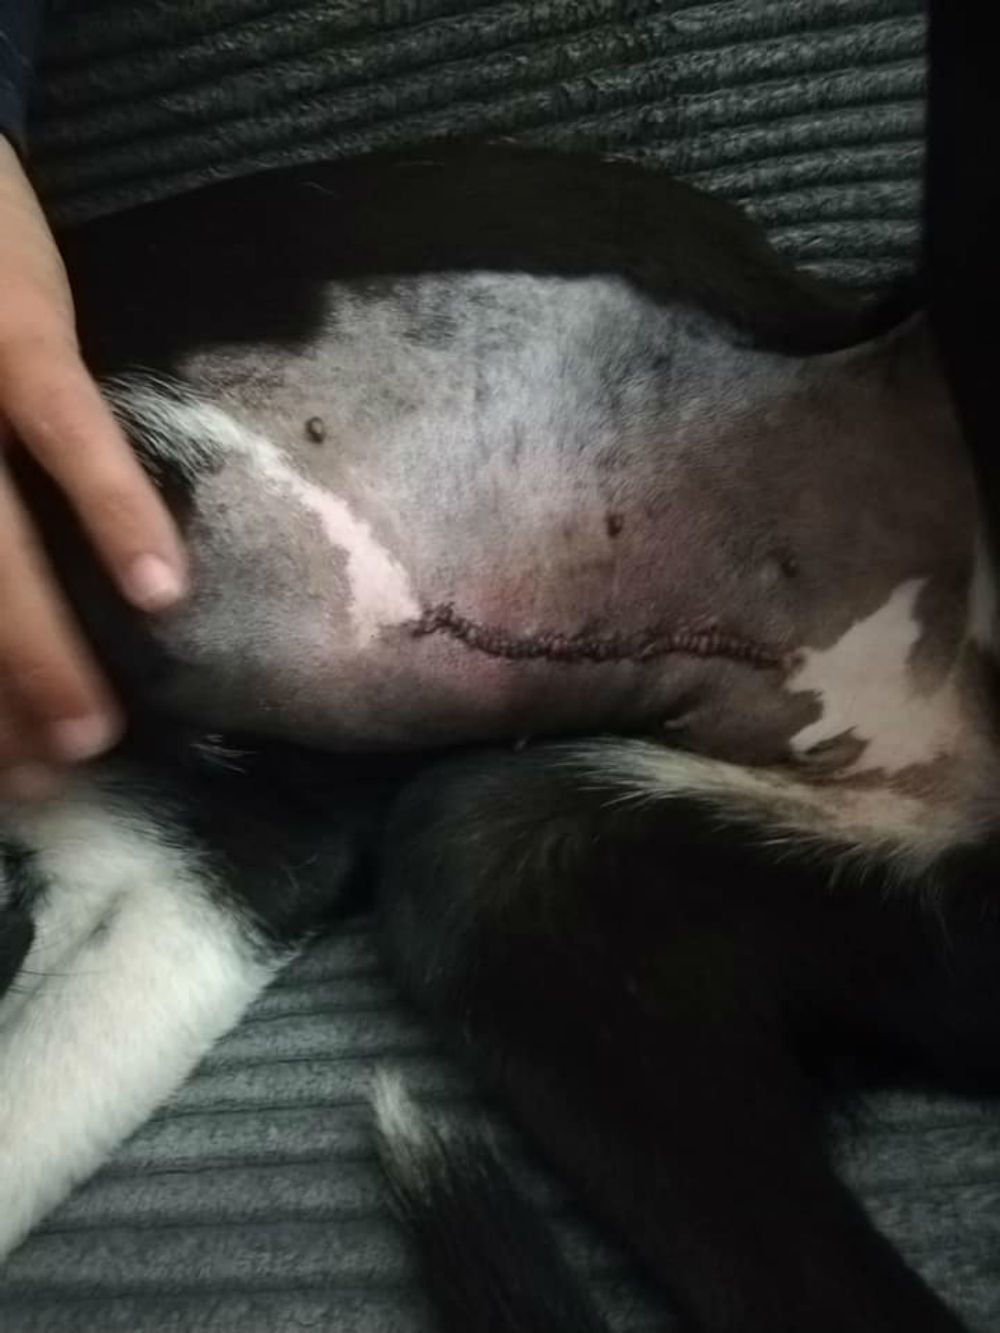 Dog with scar on belly